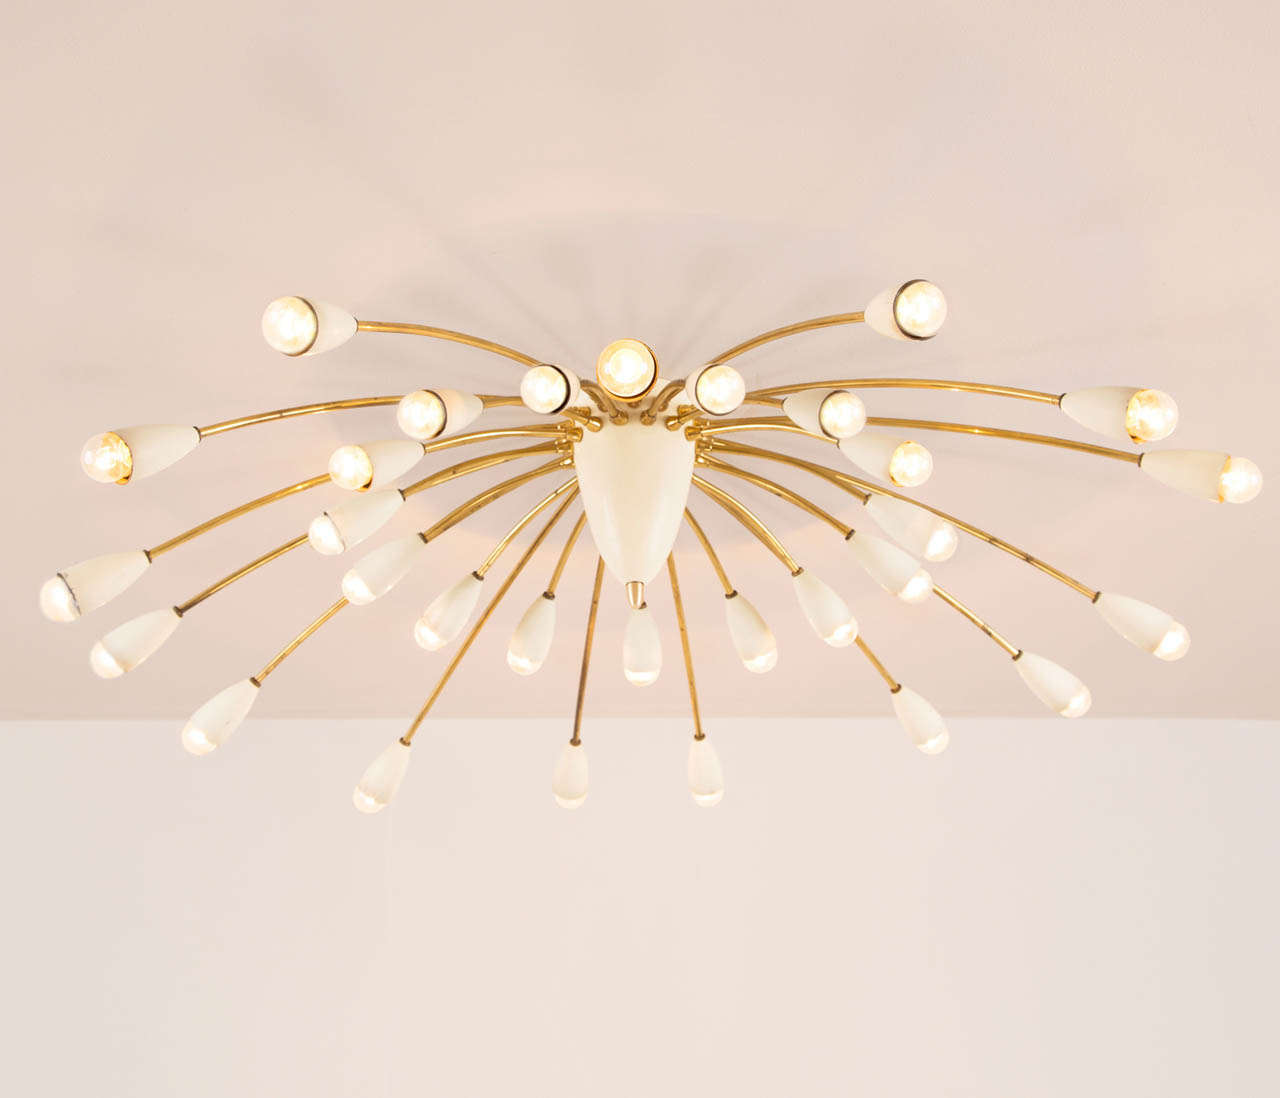 Interesting ceiling lamp from Italian origin with 30 arms.

The chandelier has a solid brass base with white coated plastic shades and enameled body.

Elegant light partition and unique expression.

A few caps shows minor wear consistent with